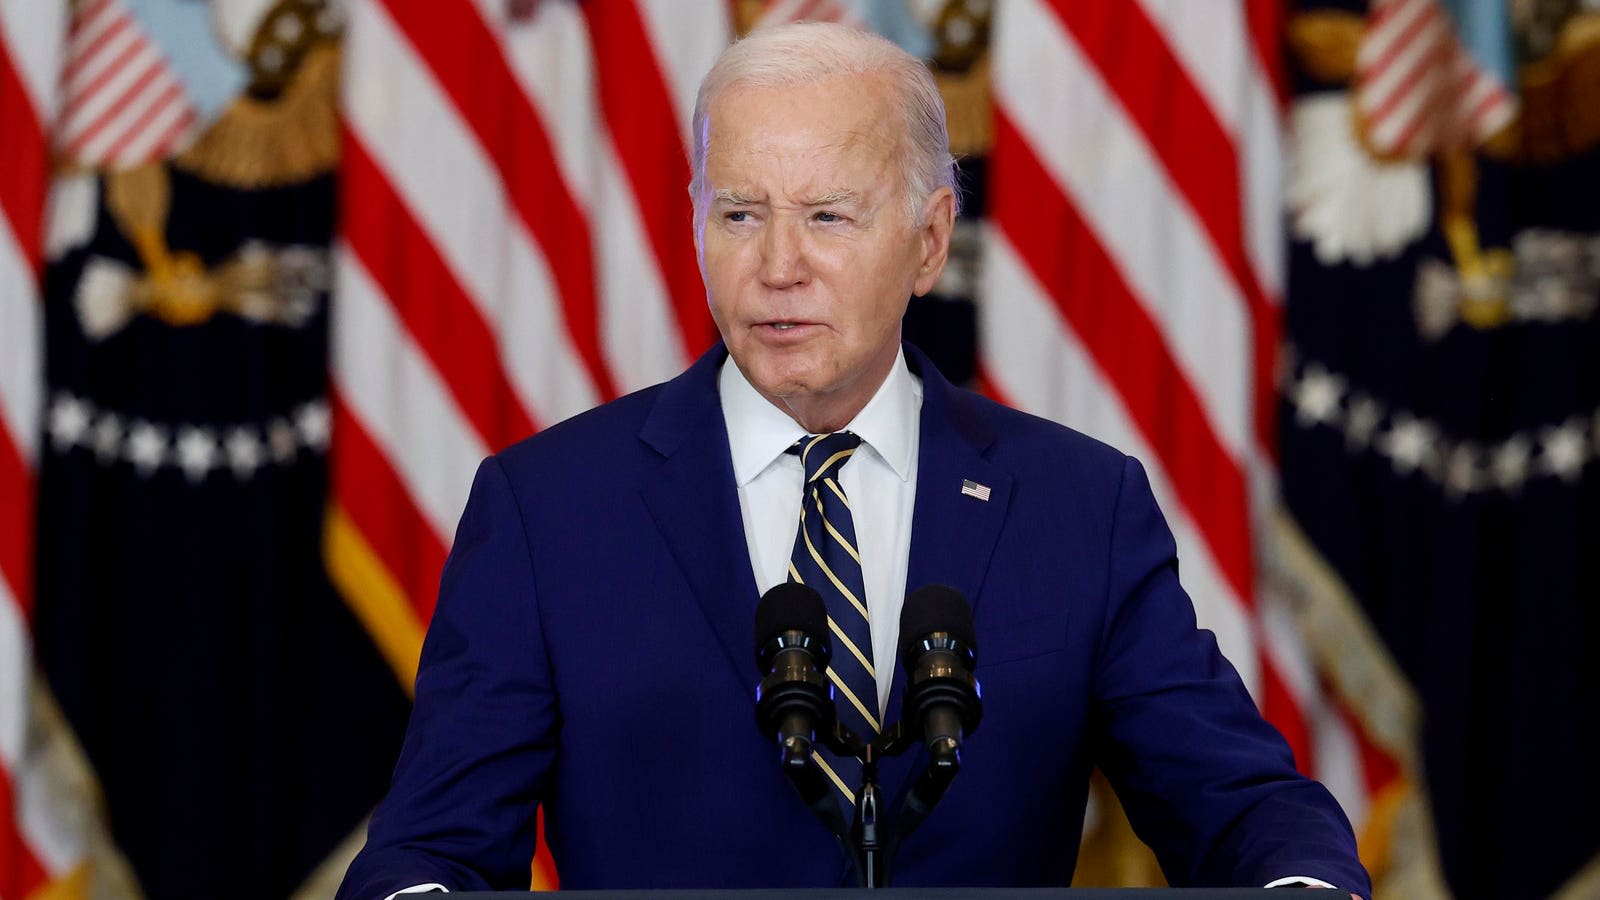 Biden To Cut Student Loan Payments For Up To 8 Million Borrowers Next Month — With One Caveat